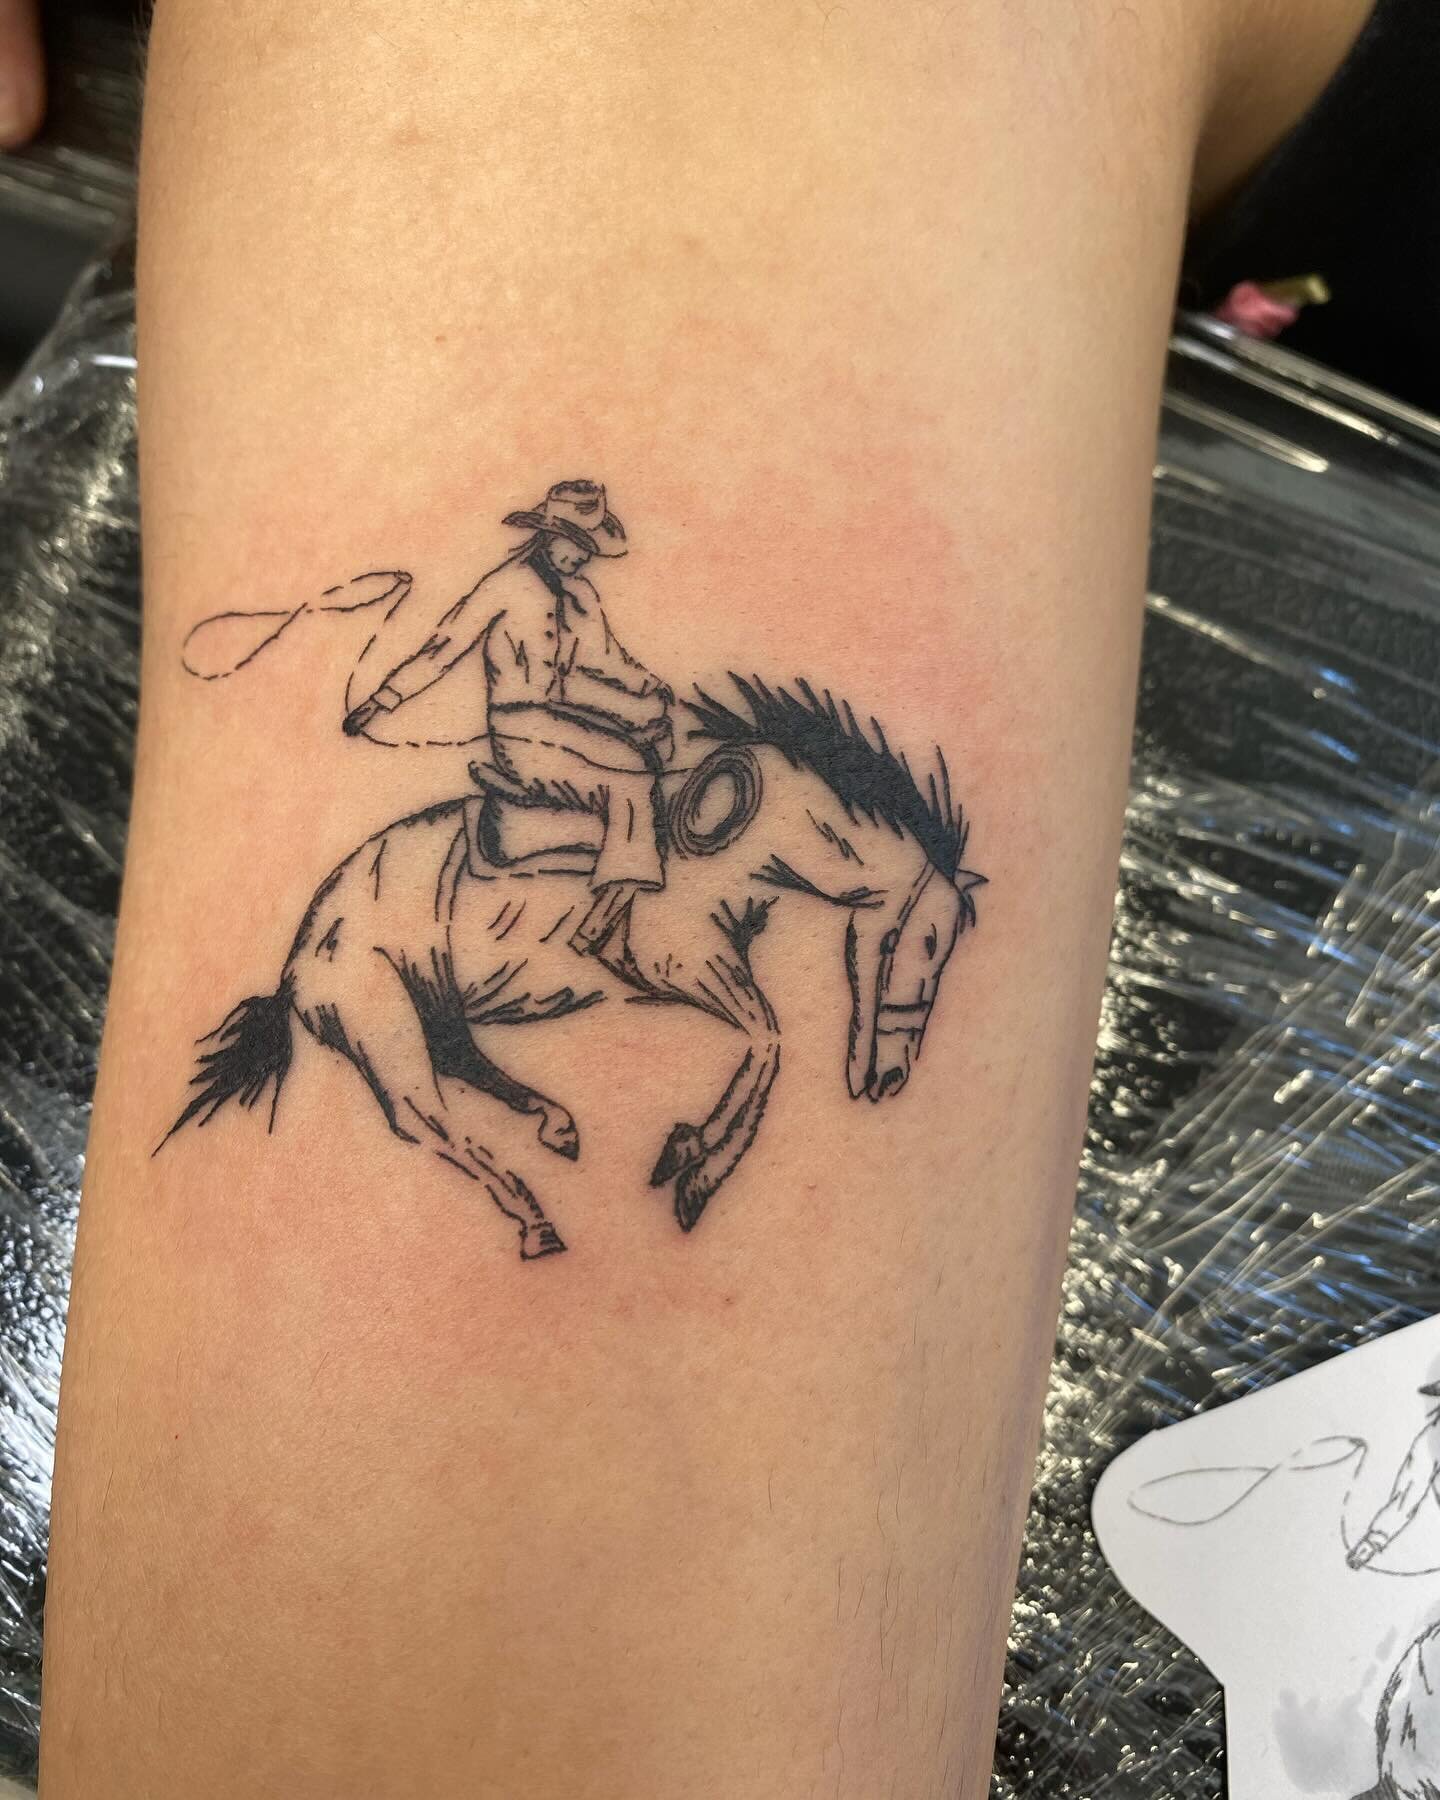 Giddy up. Booking the last few weekends in March, and all of April. $150 for most flash. Get at me. 
-
-
-
-
-
-
-
#flashtattoo #cowboytattoo #bayareatattoo #lineworktattoo #folkarttattoo